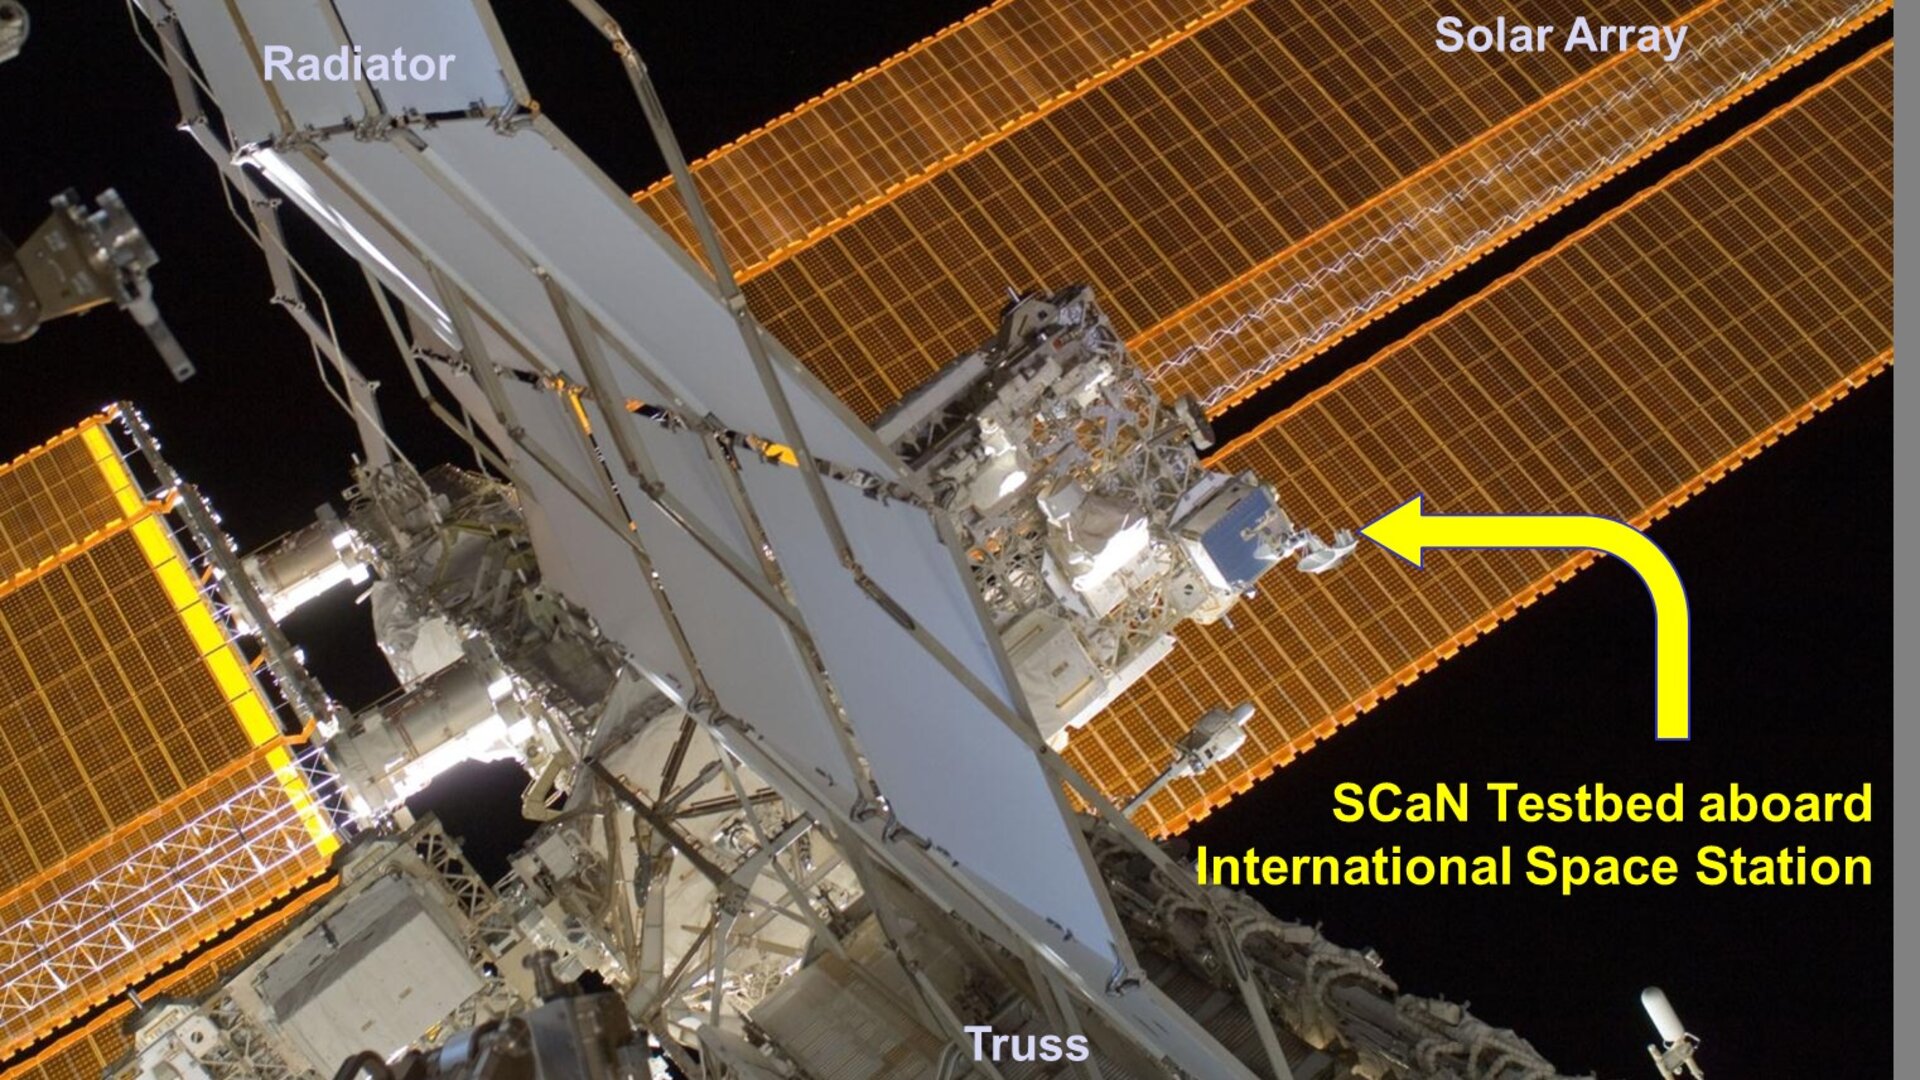 SCaN Testbed on Station